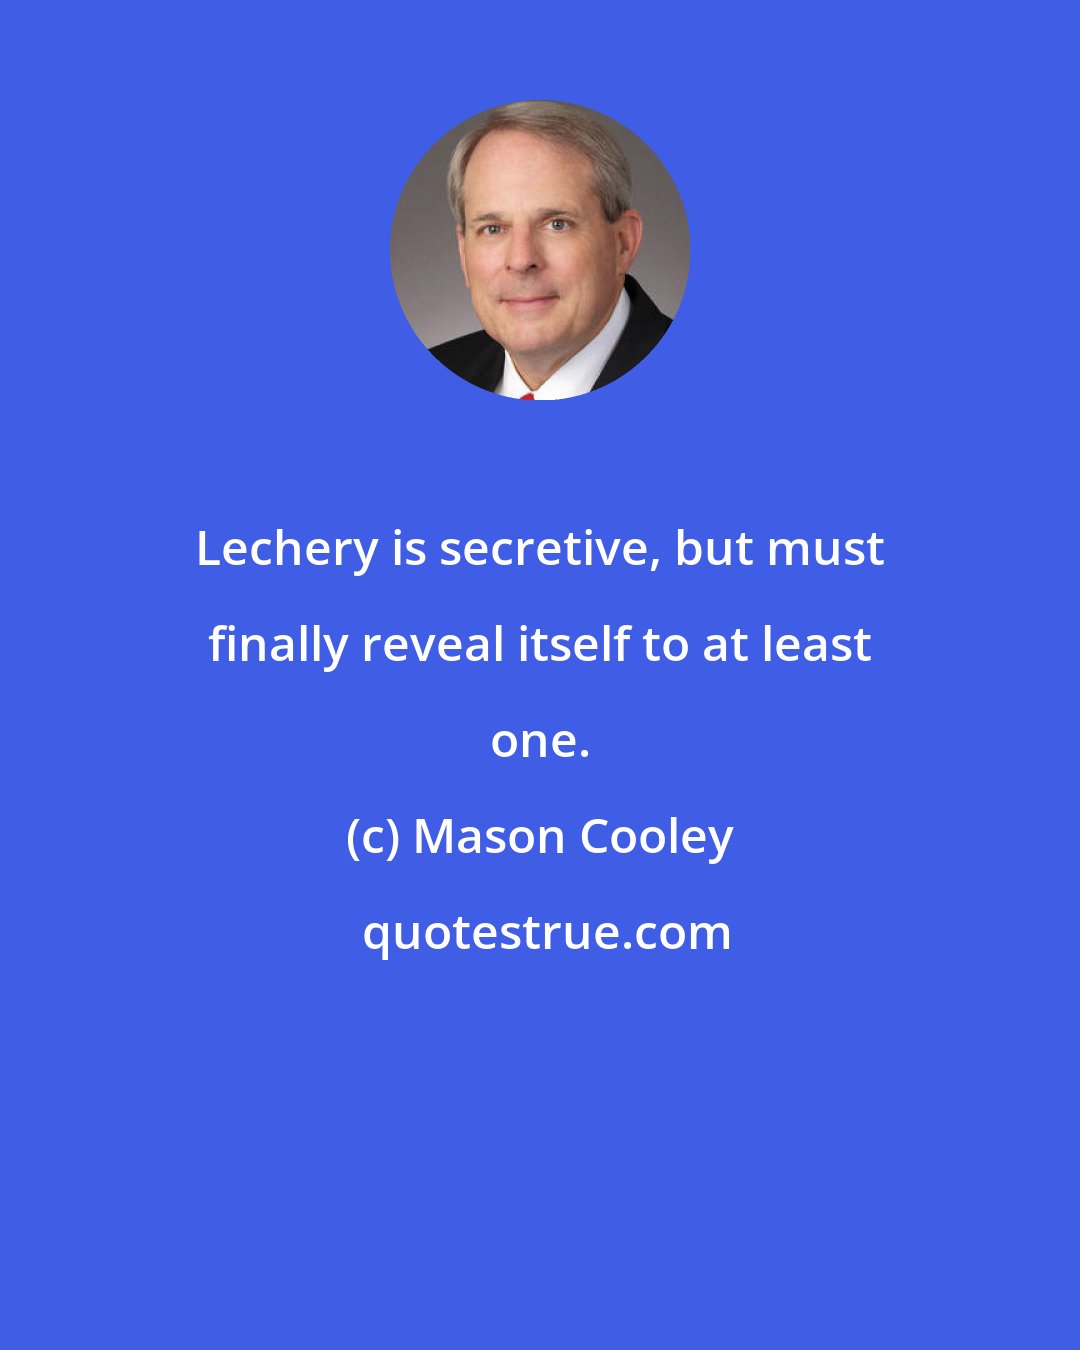 Mason Cooley: Lechery is secretive, but must finally reveal itself to at least one.